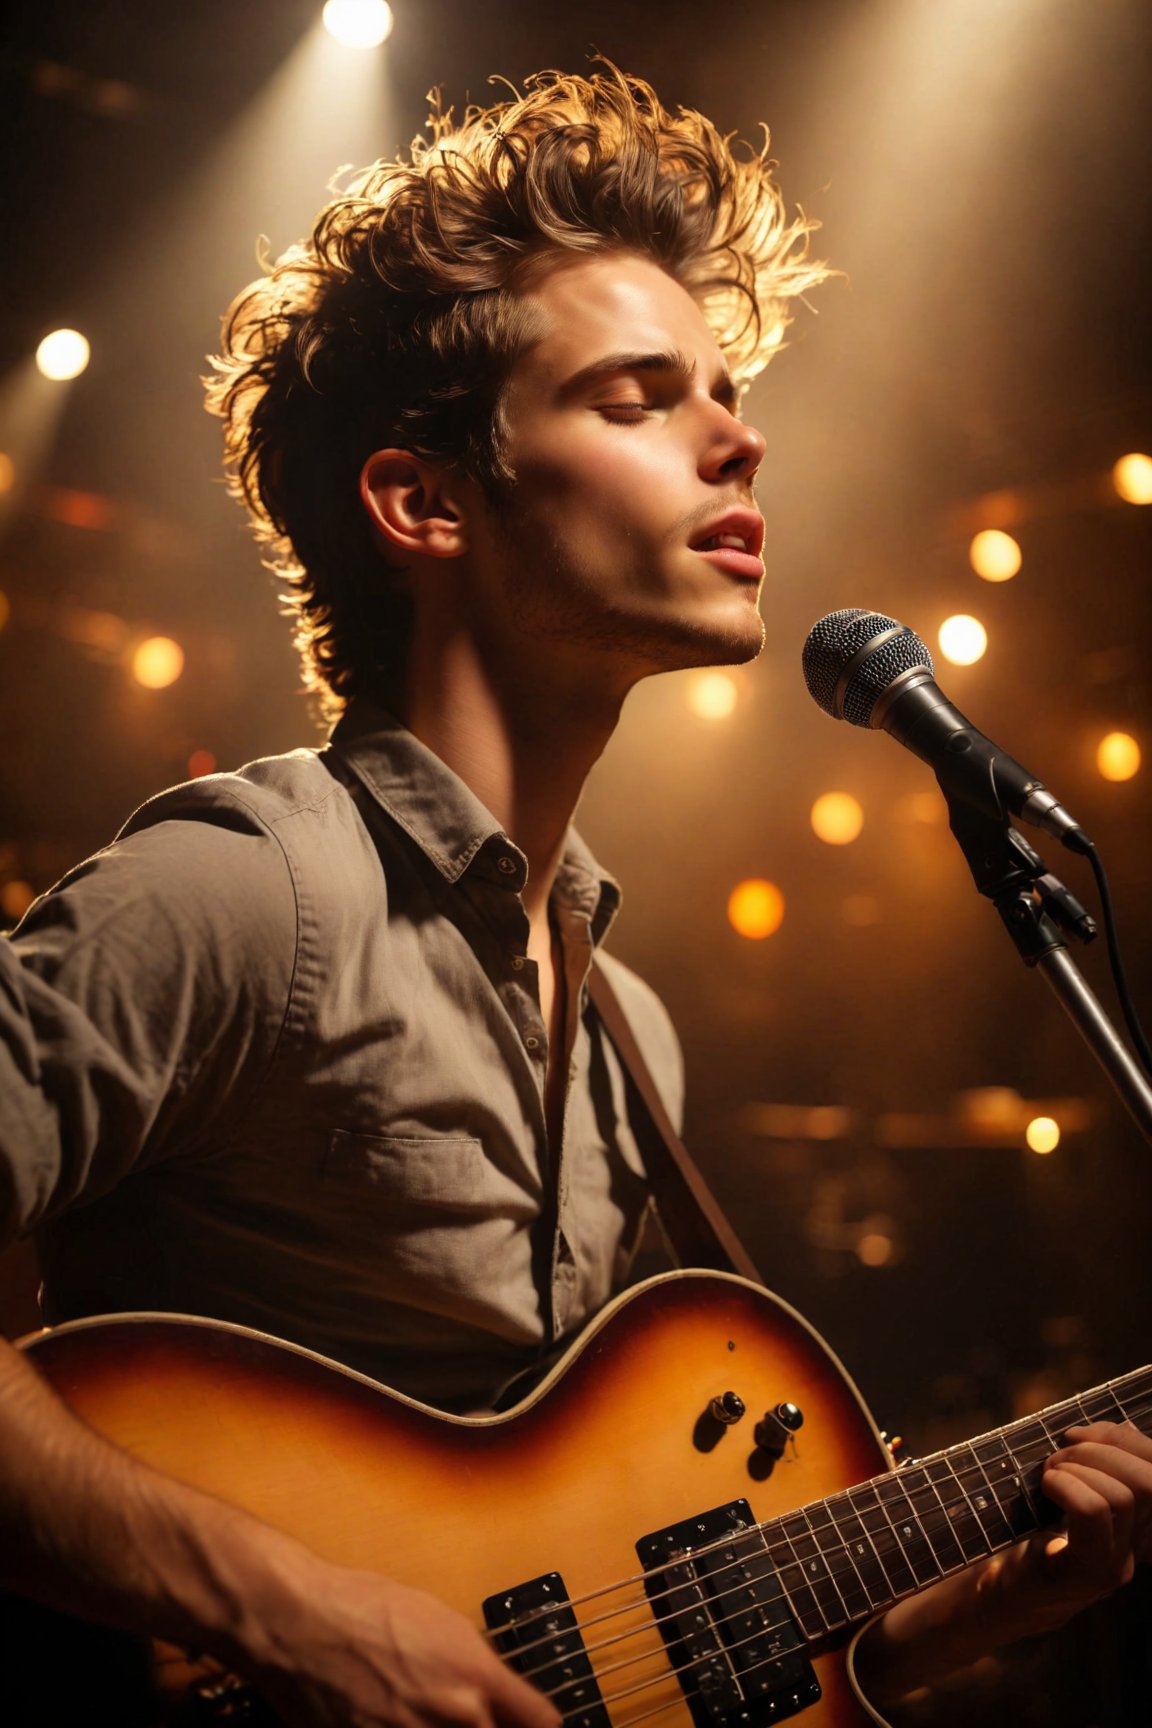 Create a portrait of a young musician lost in the moment, their eyes closed, bathed in the warm glow of stage lights, with subtle hints of emotion and passion reflecting in their expression